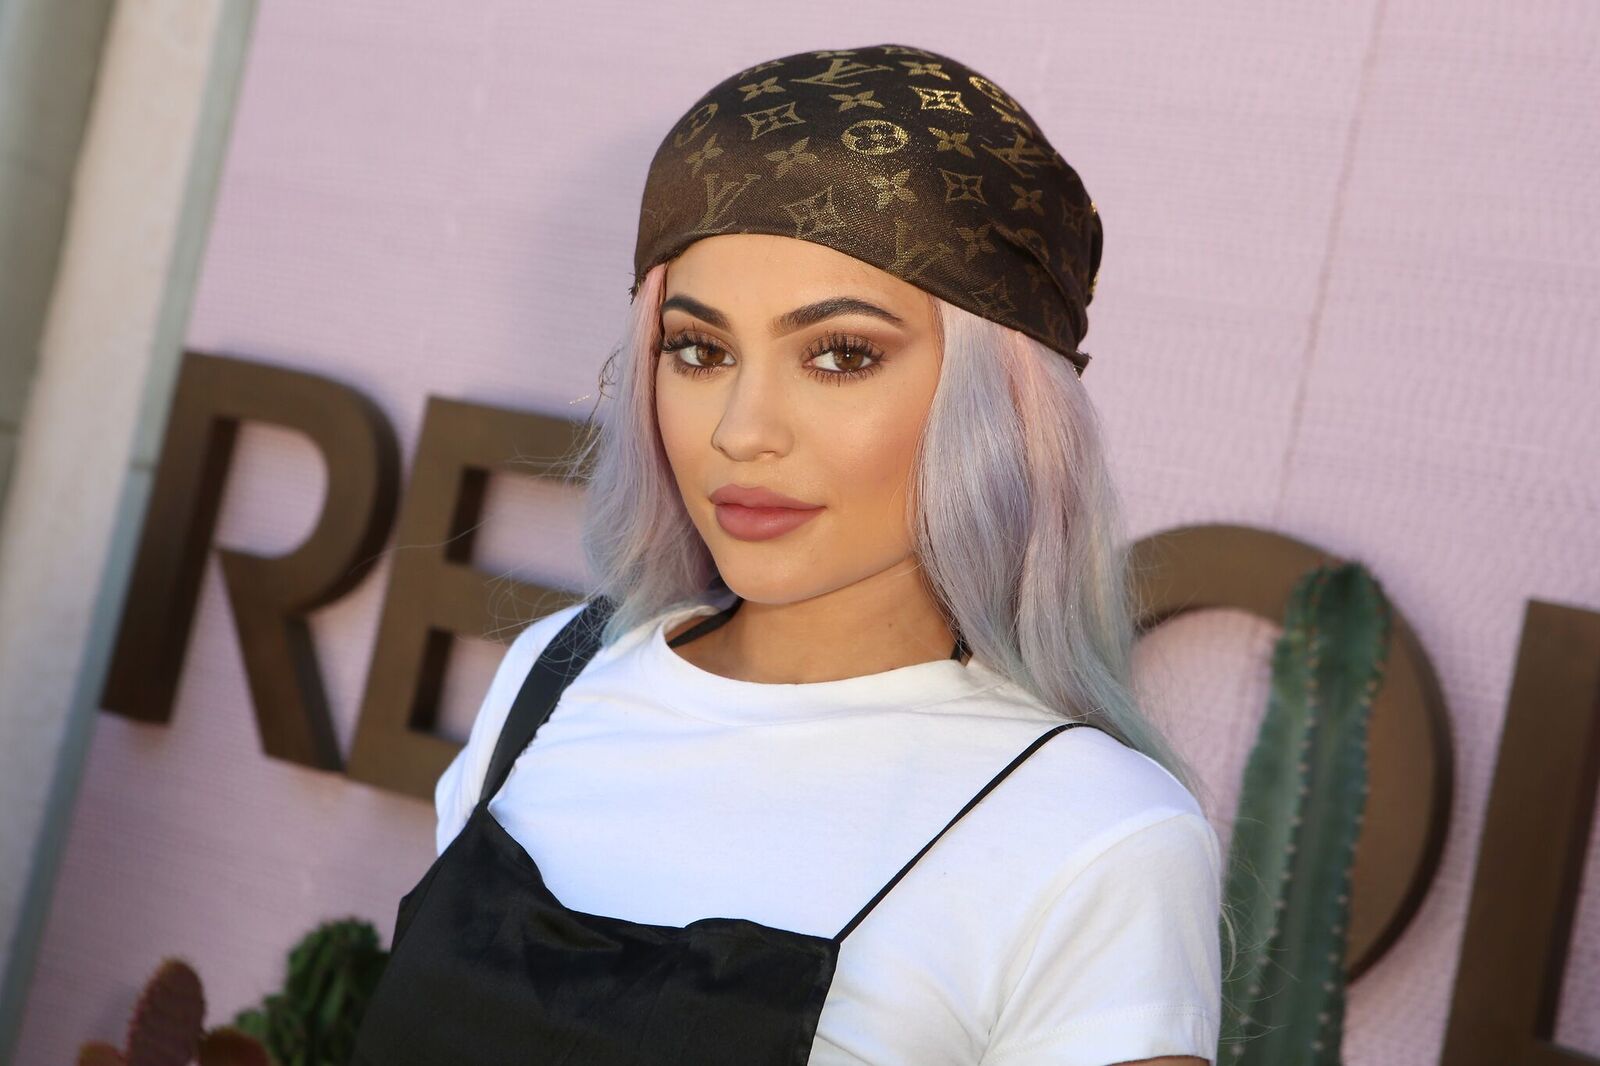 Kylie Jenner attends REVOLVE Desert House on April 17, 2016 in Thermal, California | Photo: Getty Images